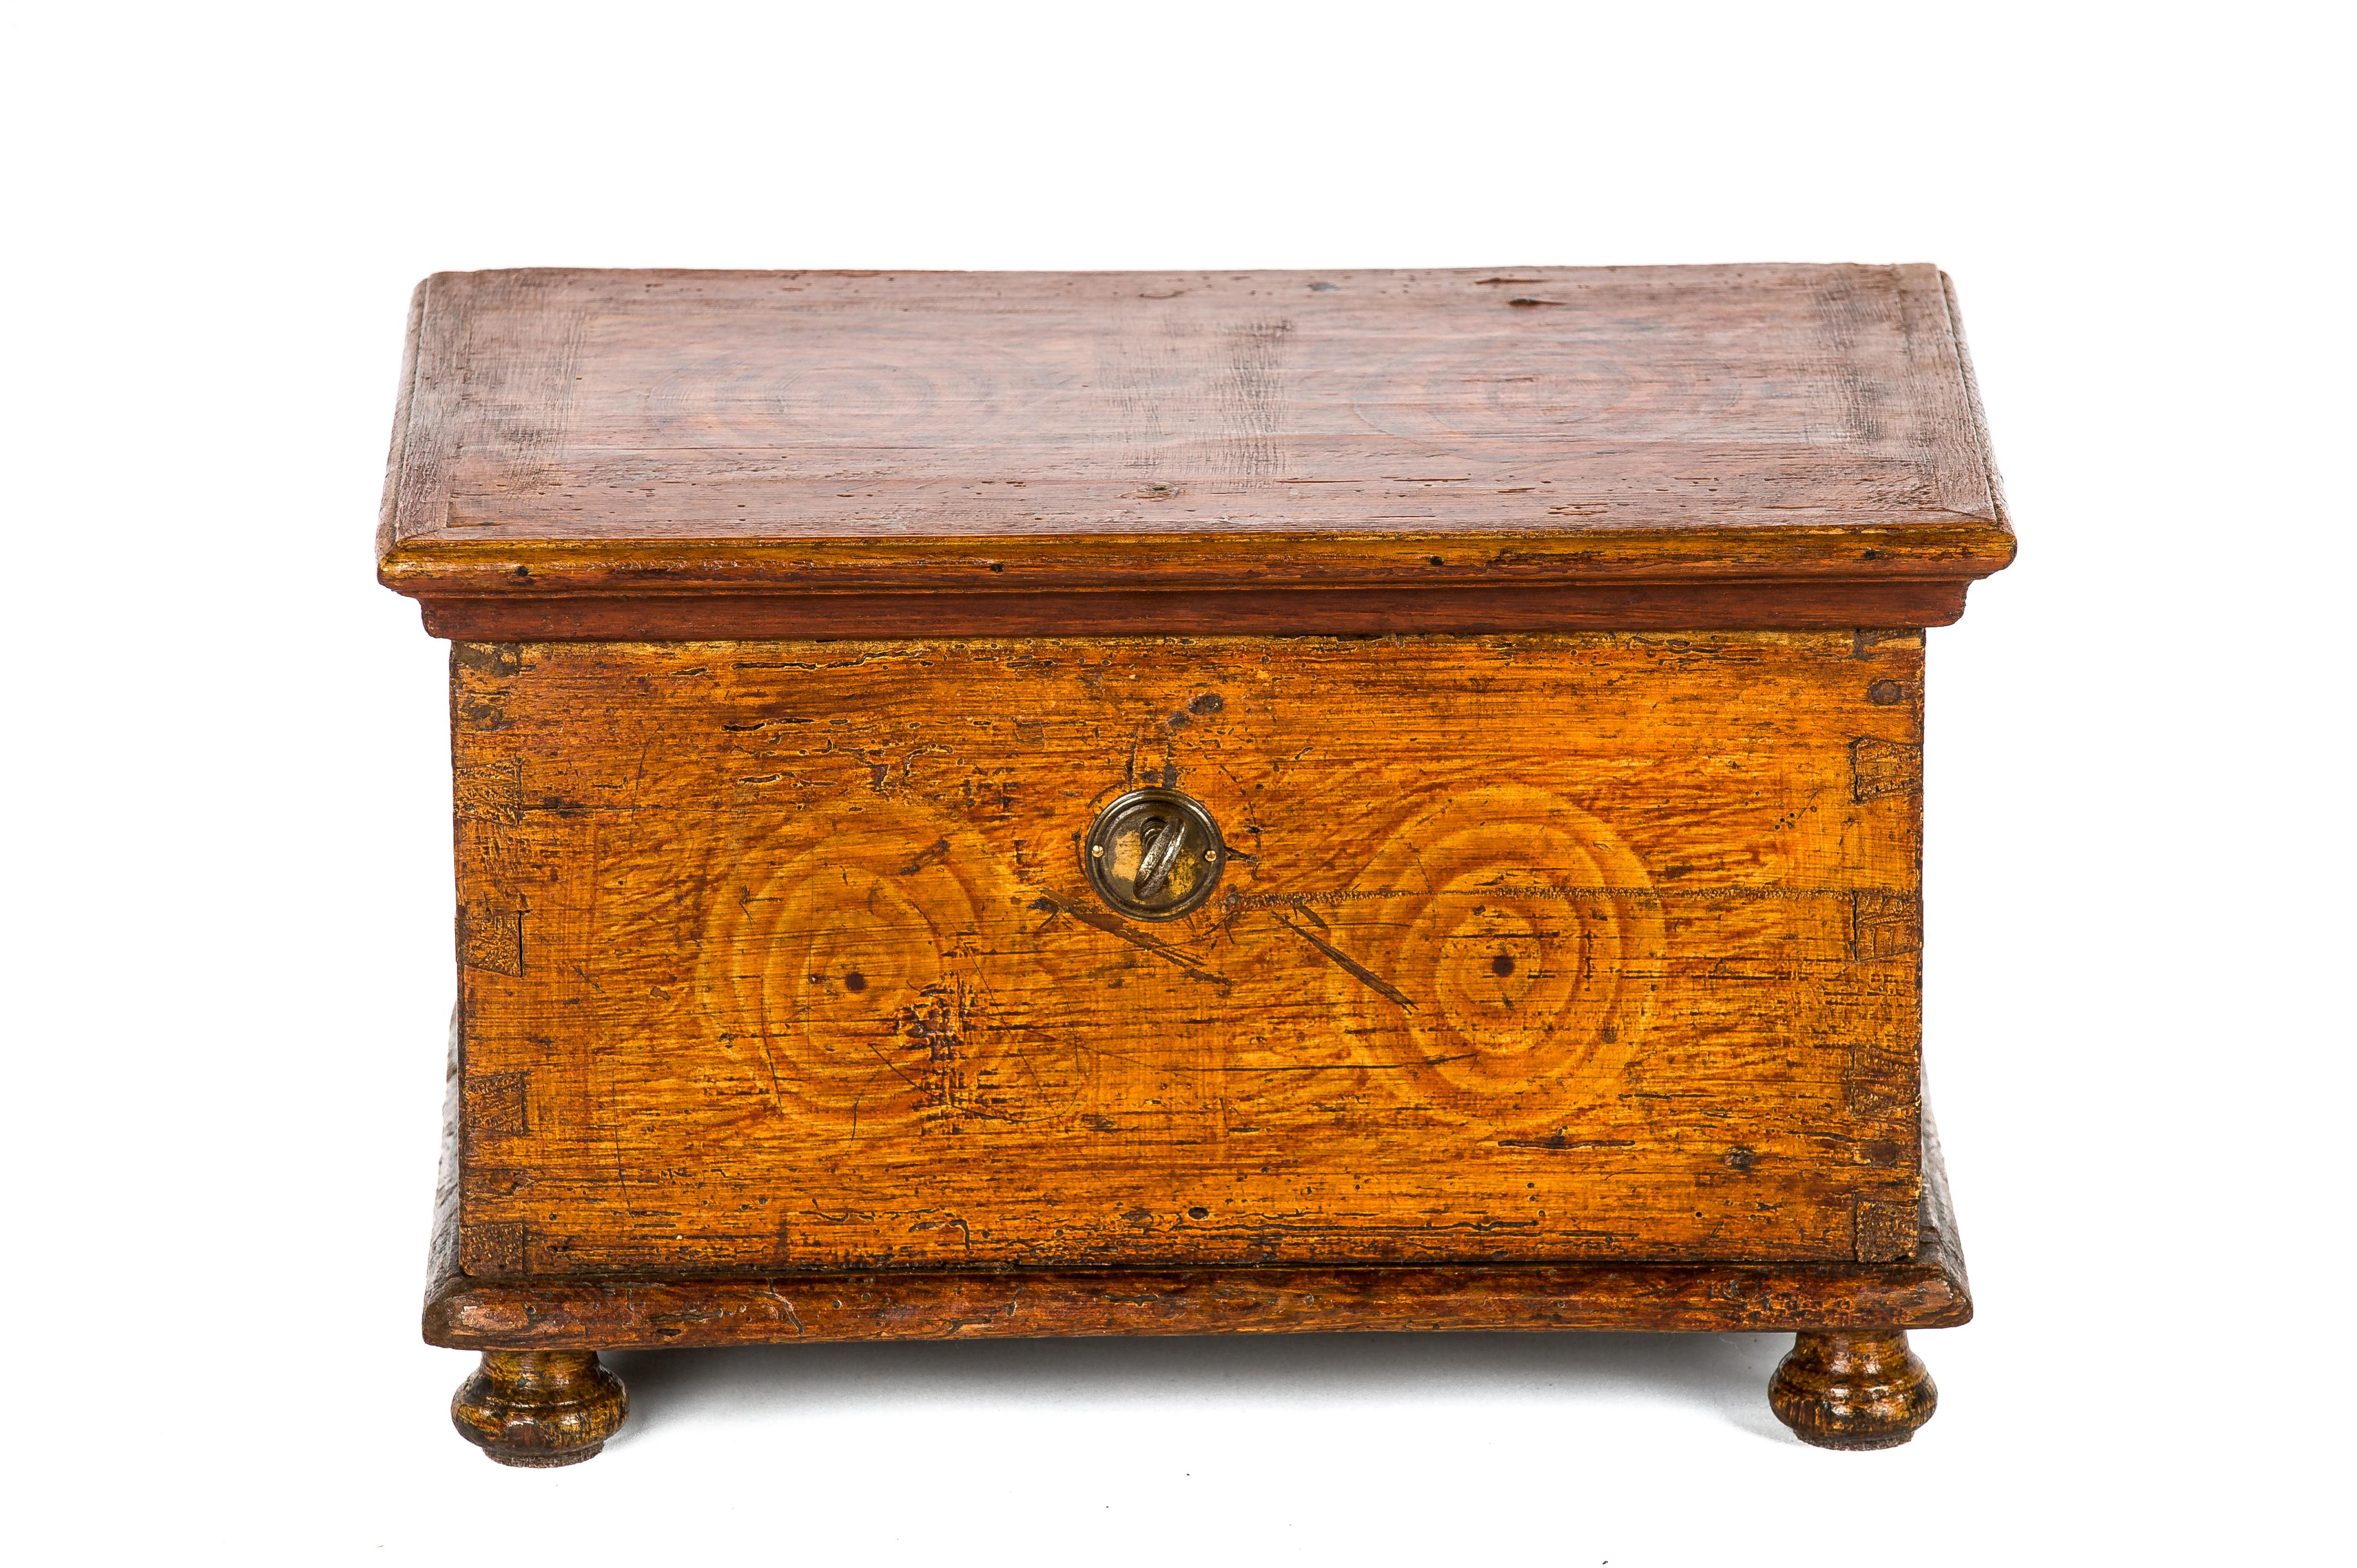 A rare small table trunk that was made in the Netherlands in the early 1800s. It is made of solid pine and it was painted in yellow ocher and ox-blood red. These are typical colors used for historic and folkloristic painted furniture in Staphorst,